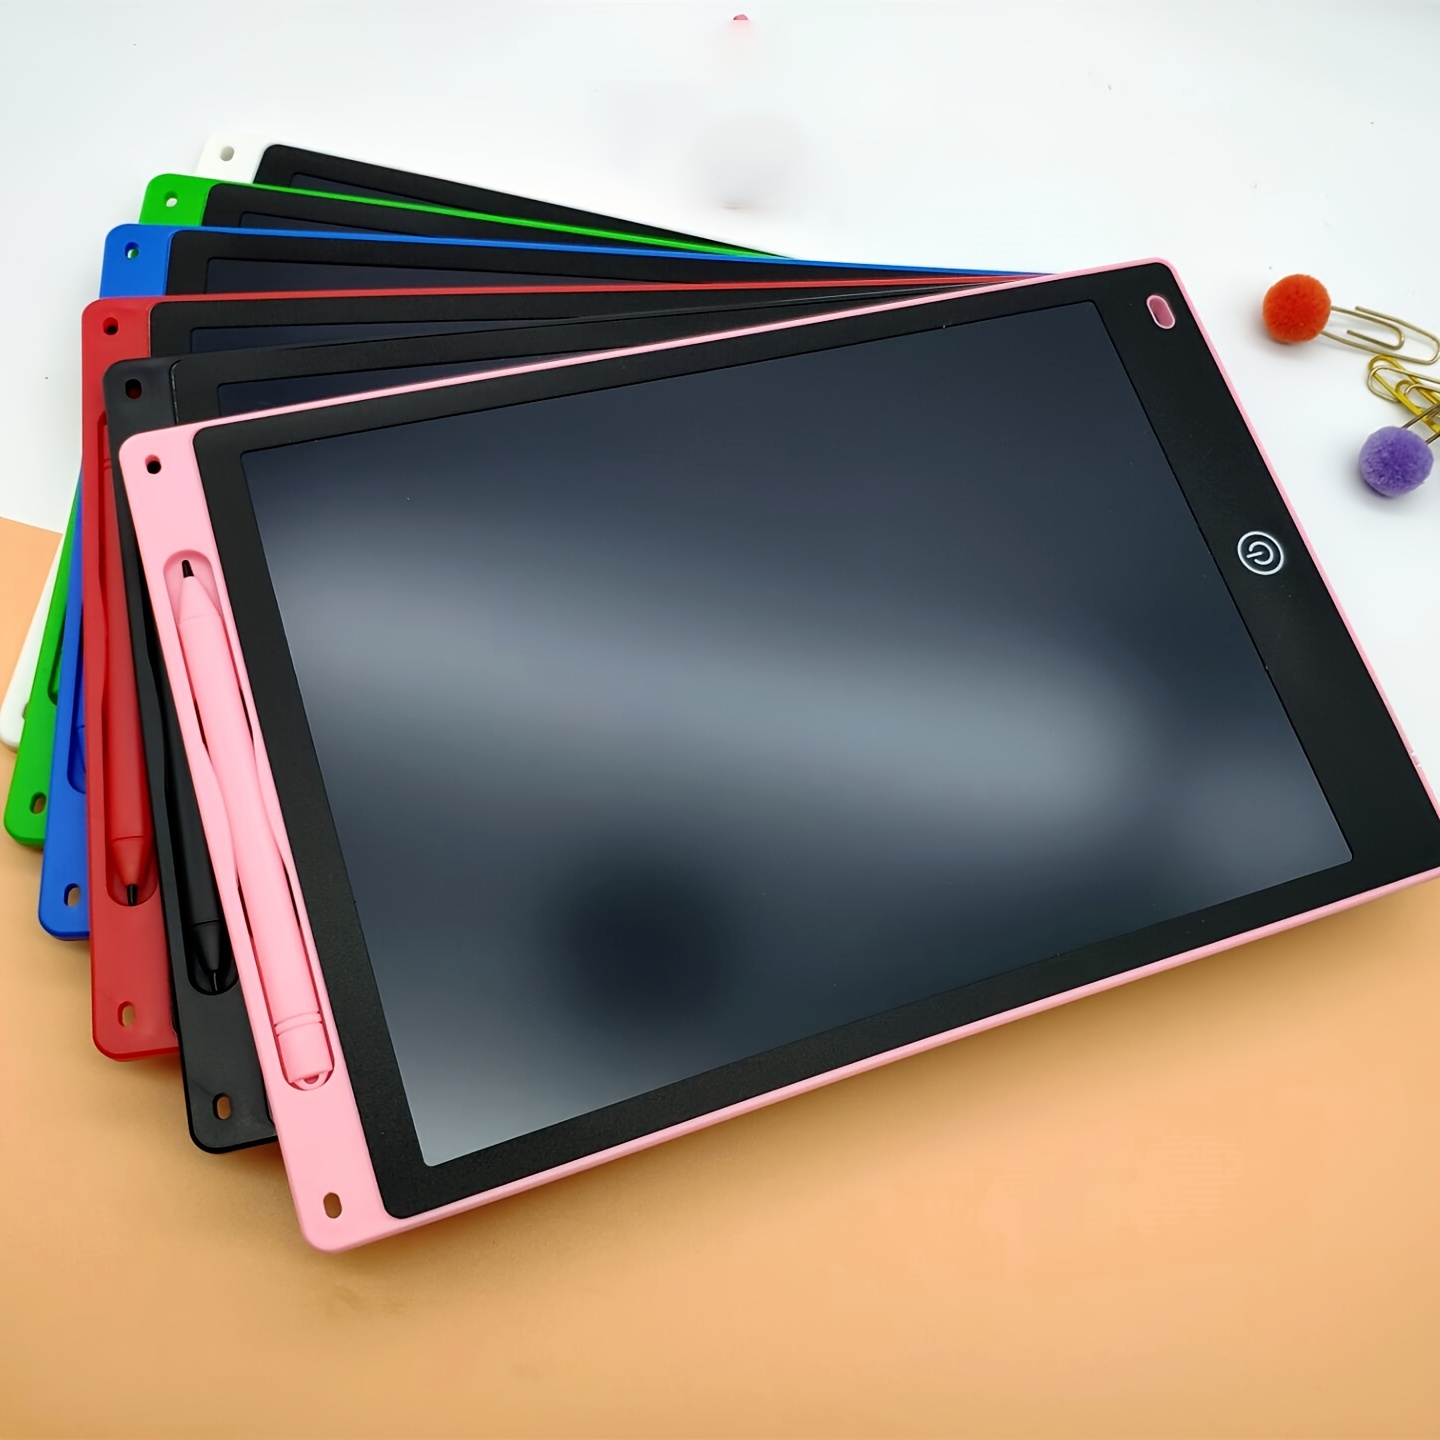 Lcd Writing Tablet 15 Inch Electronic Graphics Drawing Pads, Drawing Board  Writing, Digital Handwriting Doodle Board For Kids Home School Office Girl